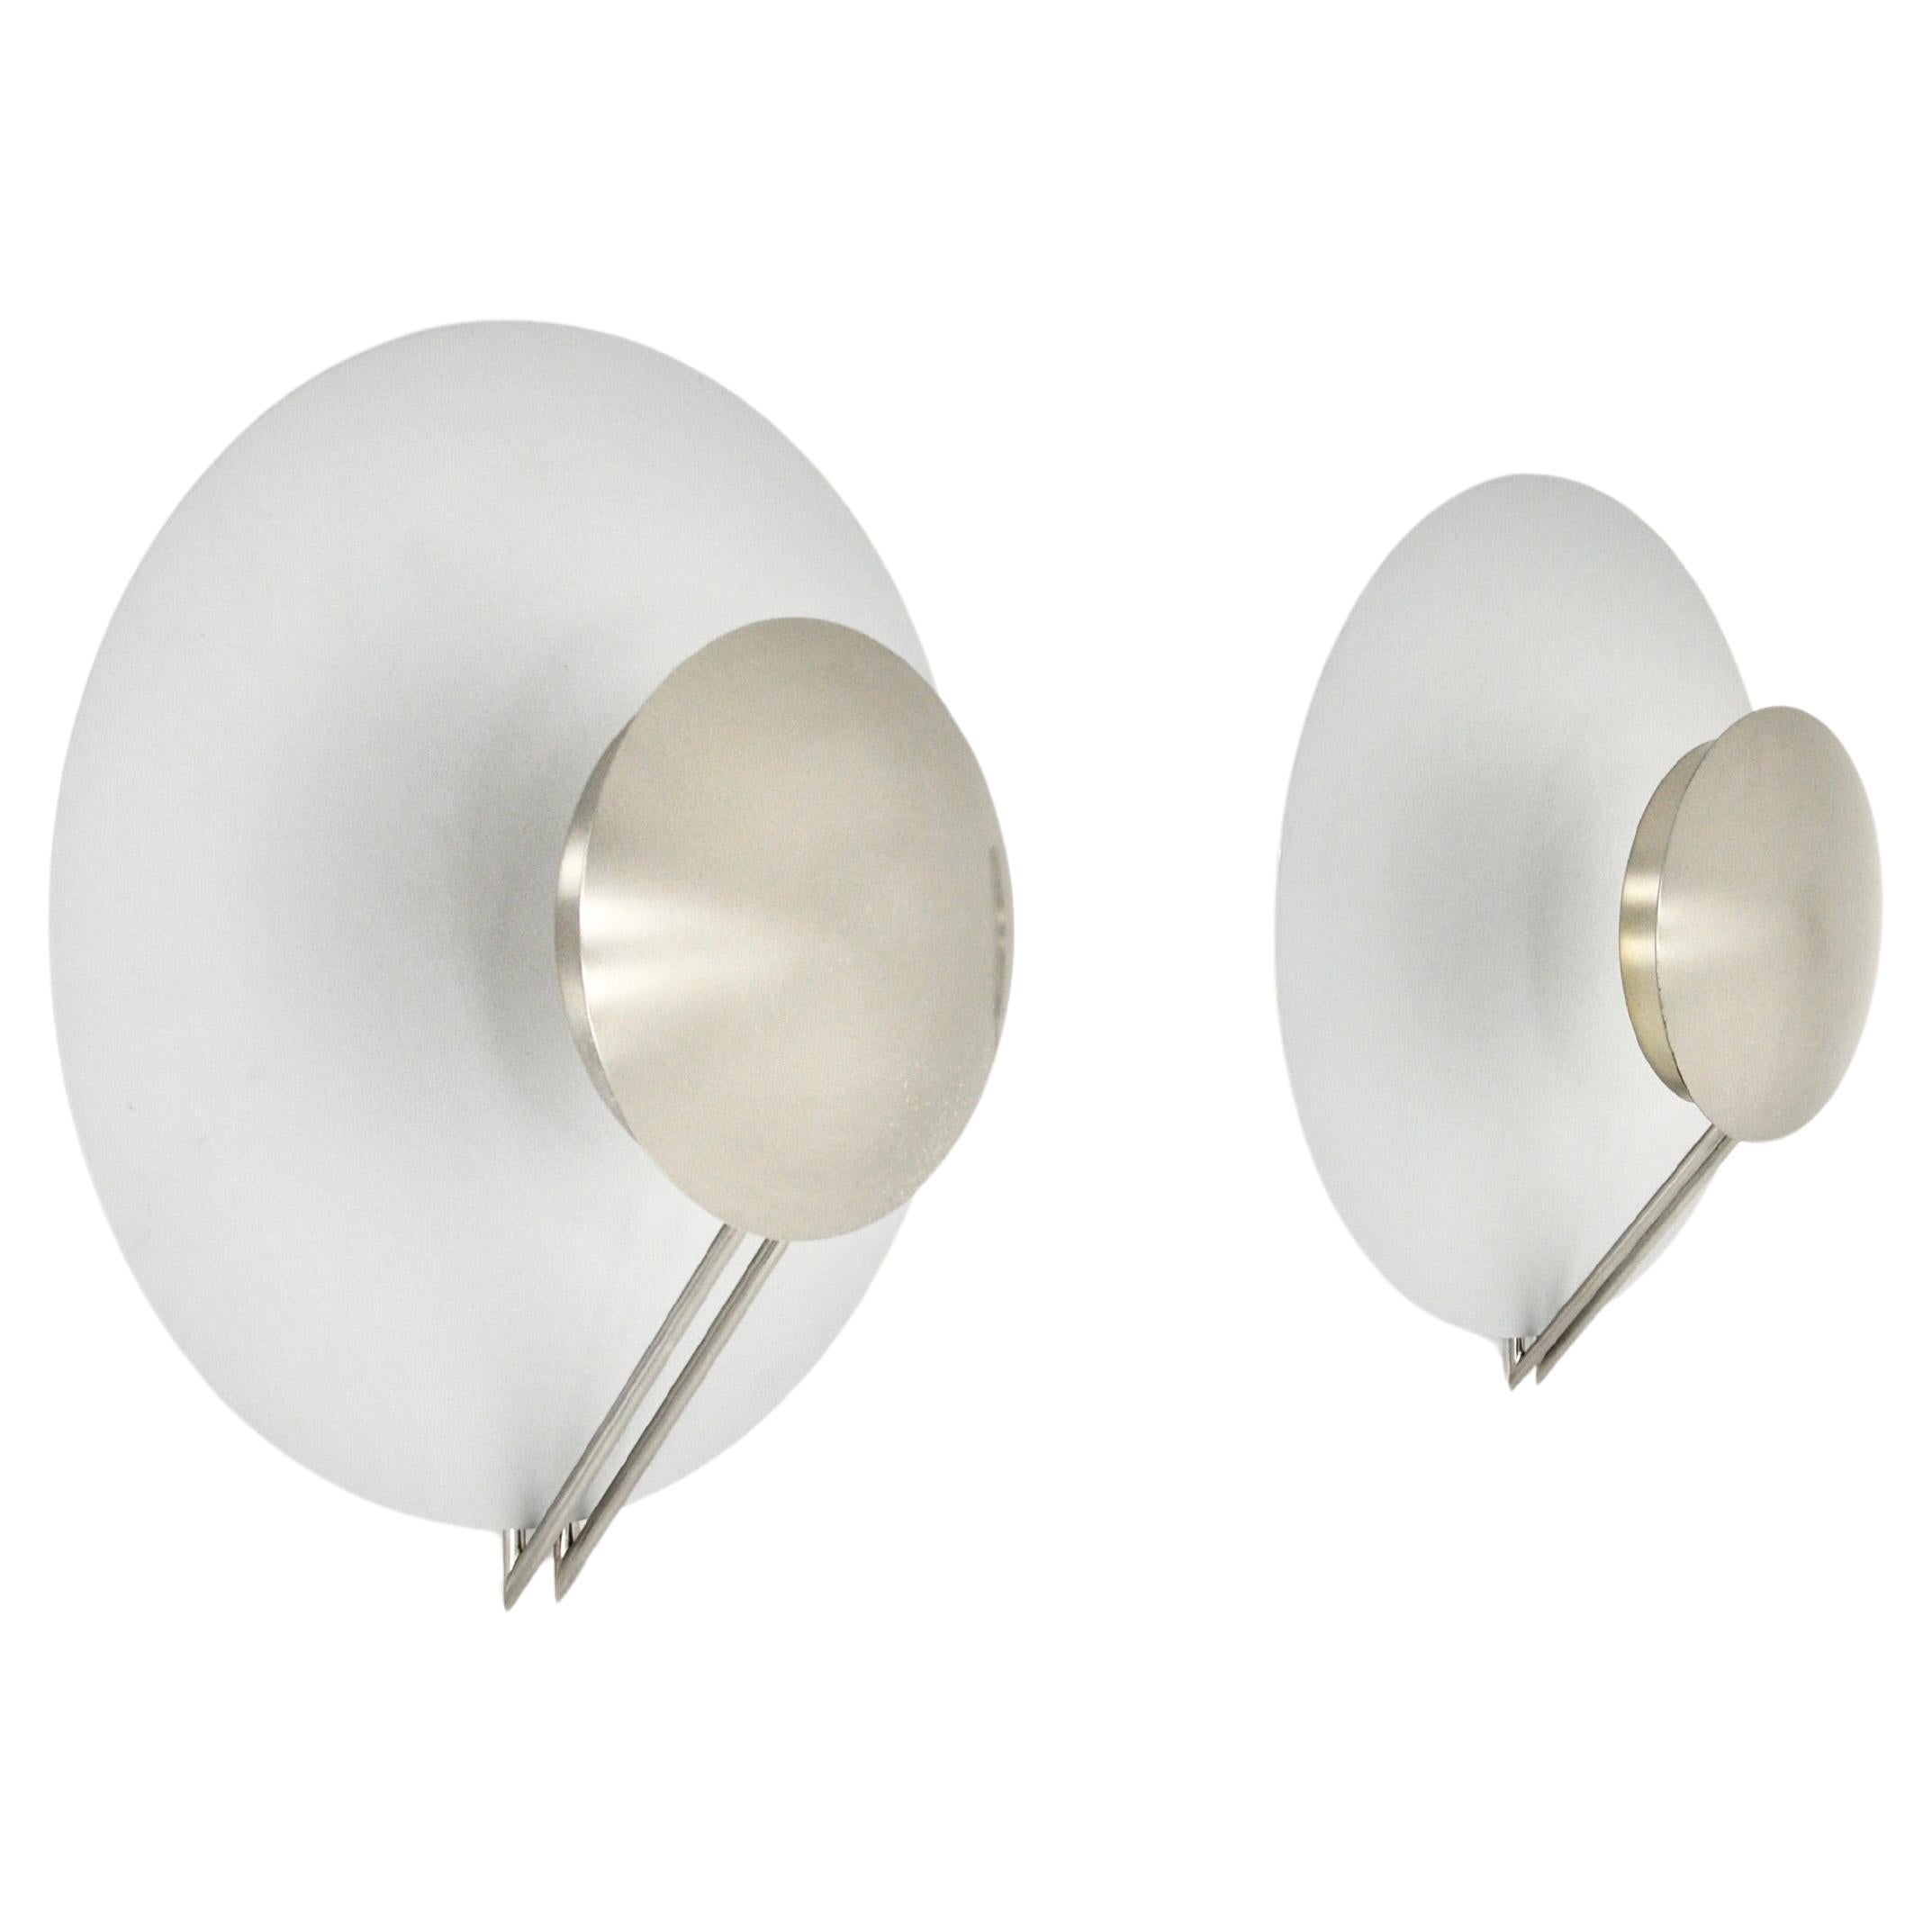 "Vega" wall lamps by L. Cesaro for Tre Ci Luce, 1980s, set of 2